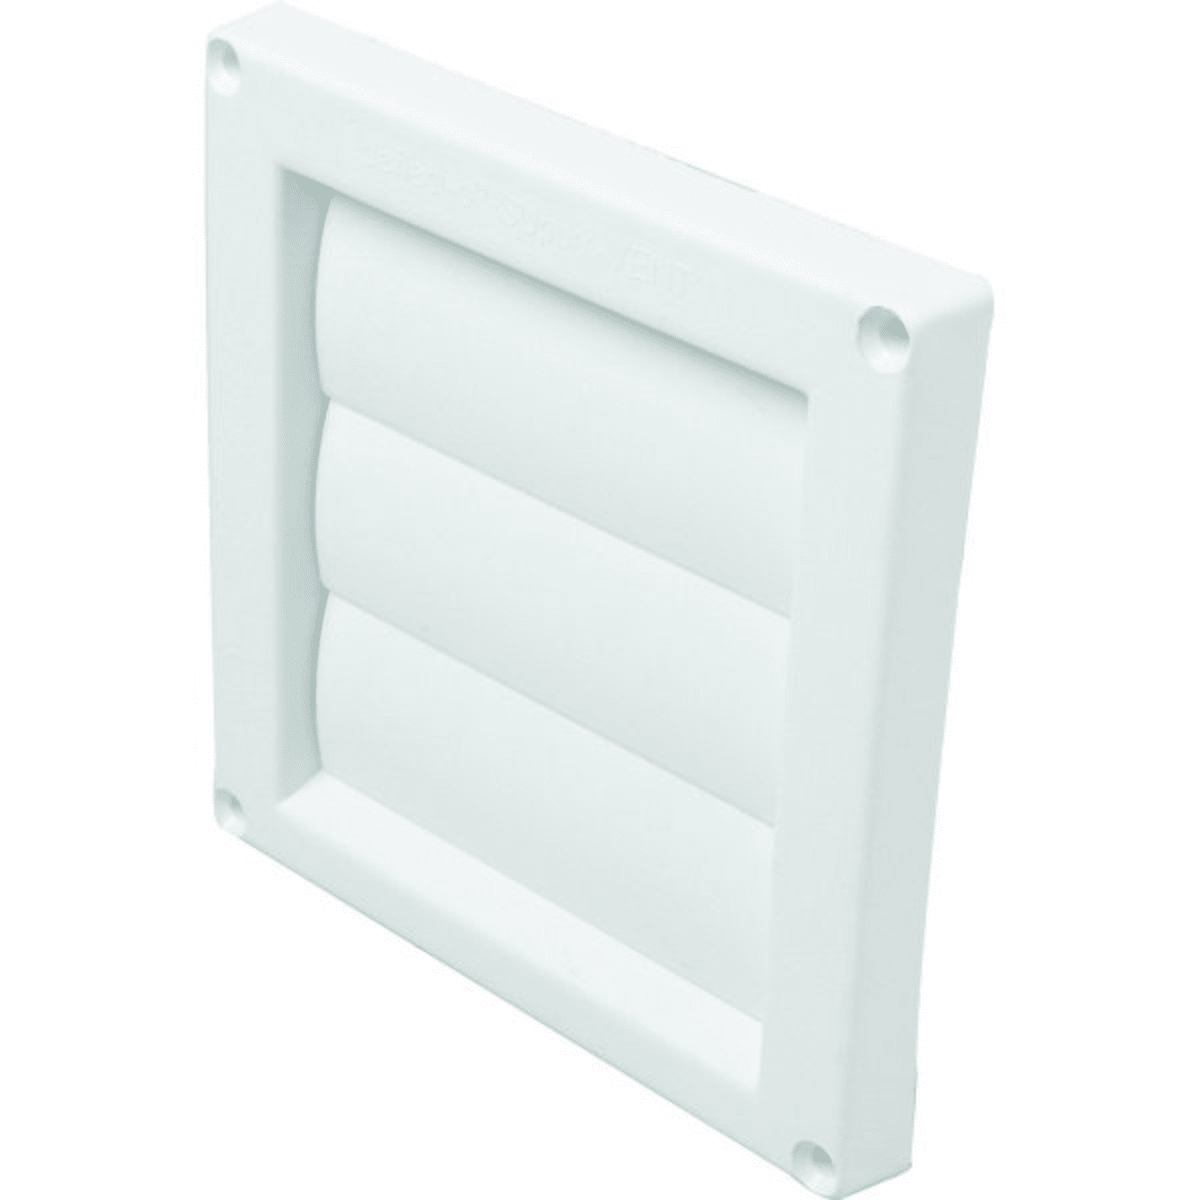 Louvered Outdoor Dryer Vent Cover White Exhaust Cap for 4/" Opening Hood Duct Inc